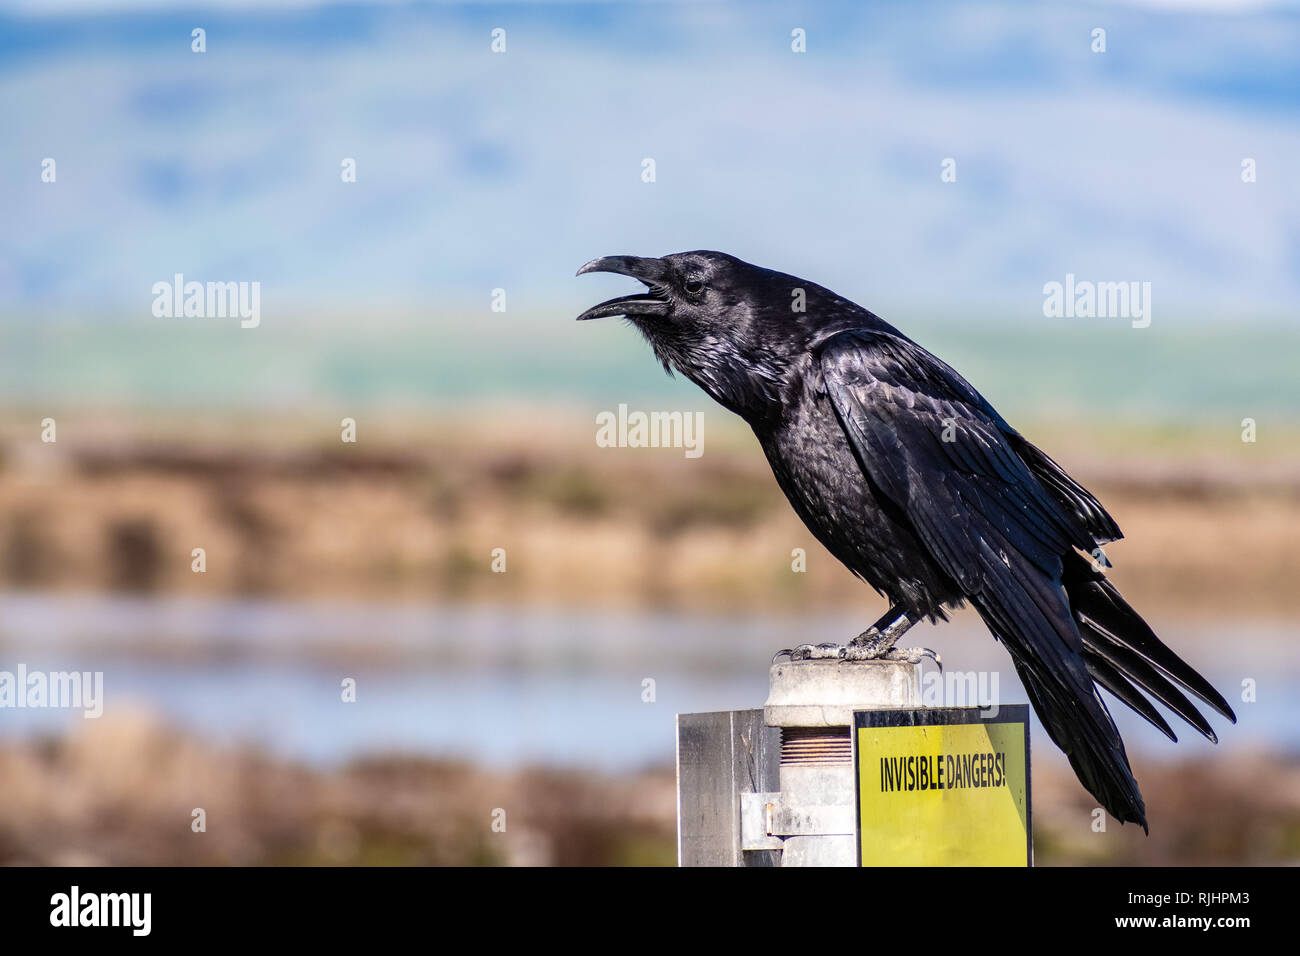 Close up of large raven perched on a metal post in south San Francisco bay area; blurred ponds and green hills visible in the background; California Stock Photo